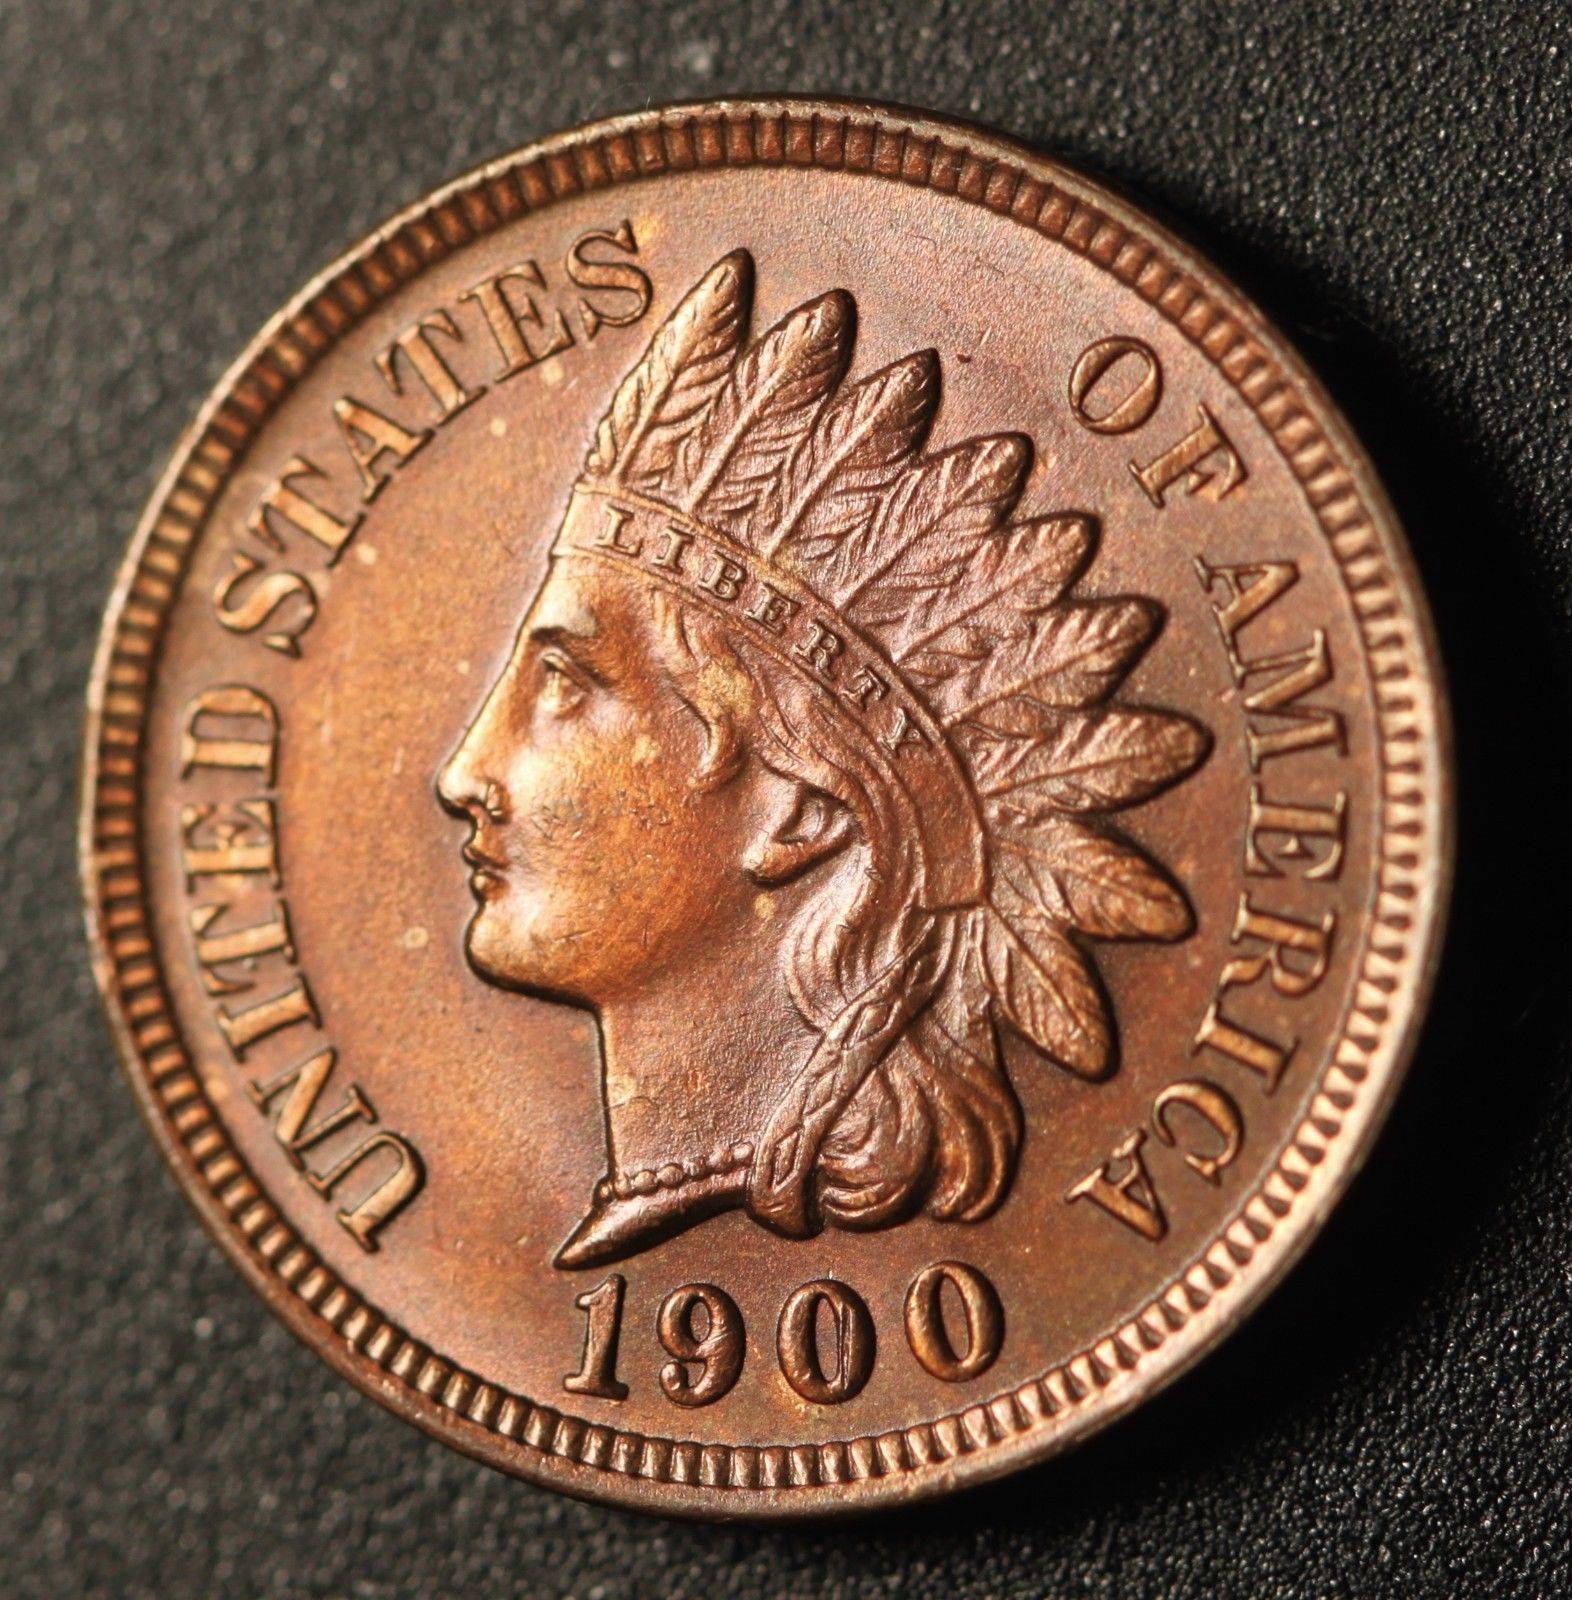 1900 RPD-028 - Indian Head Penny - Photo by Ed Nathanson